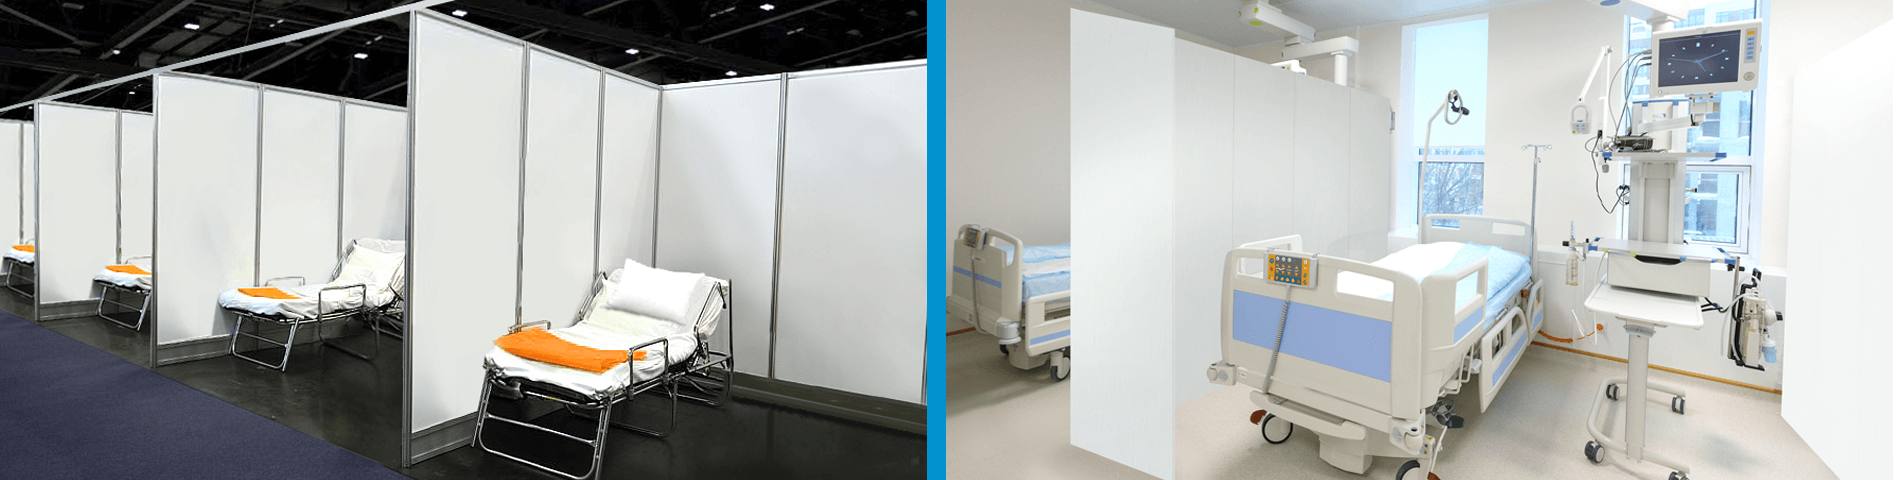 Opaque Partitions and Dividers